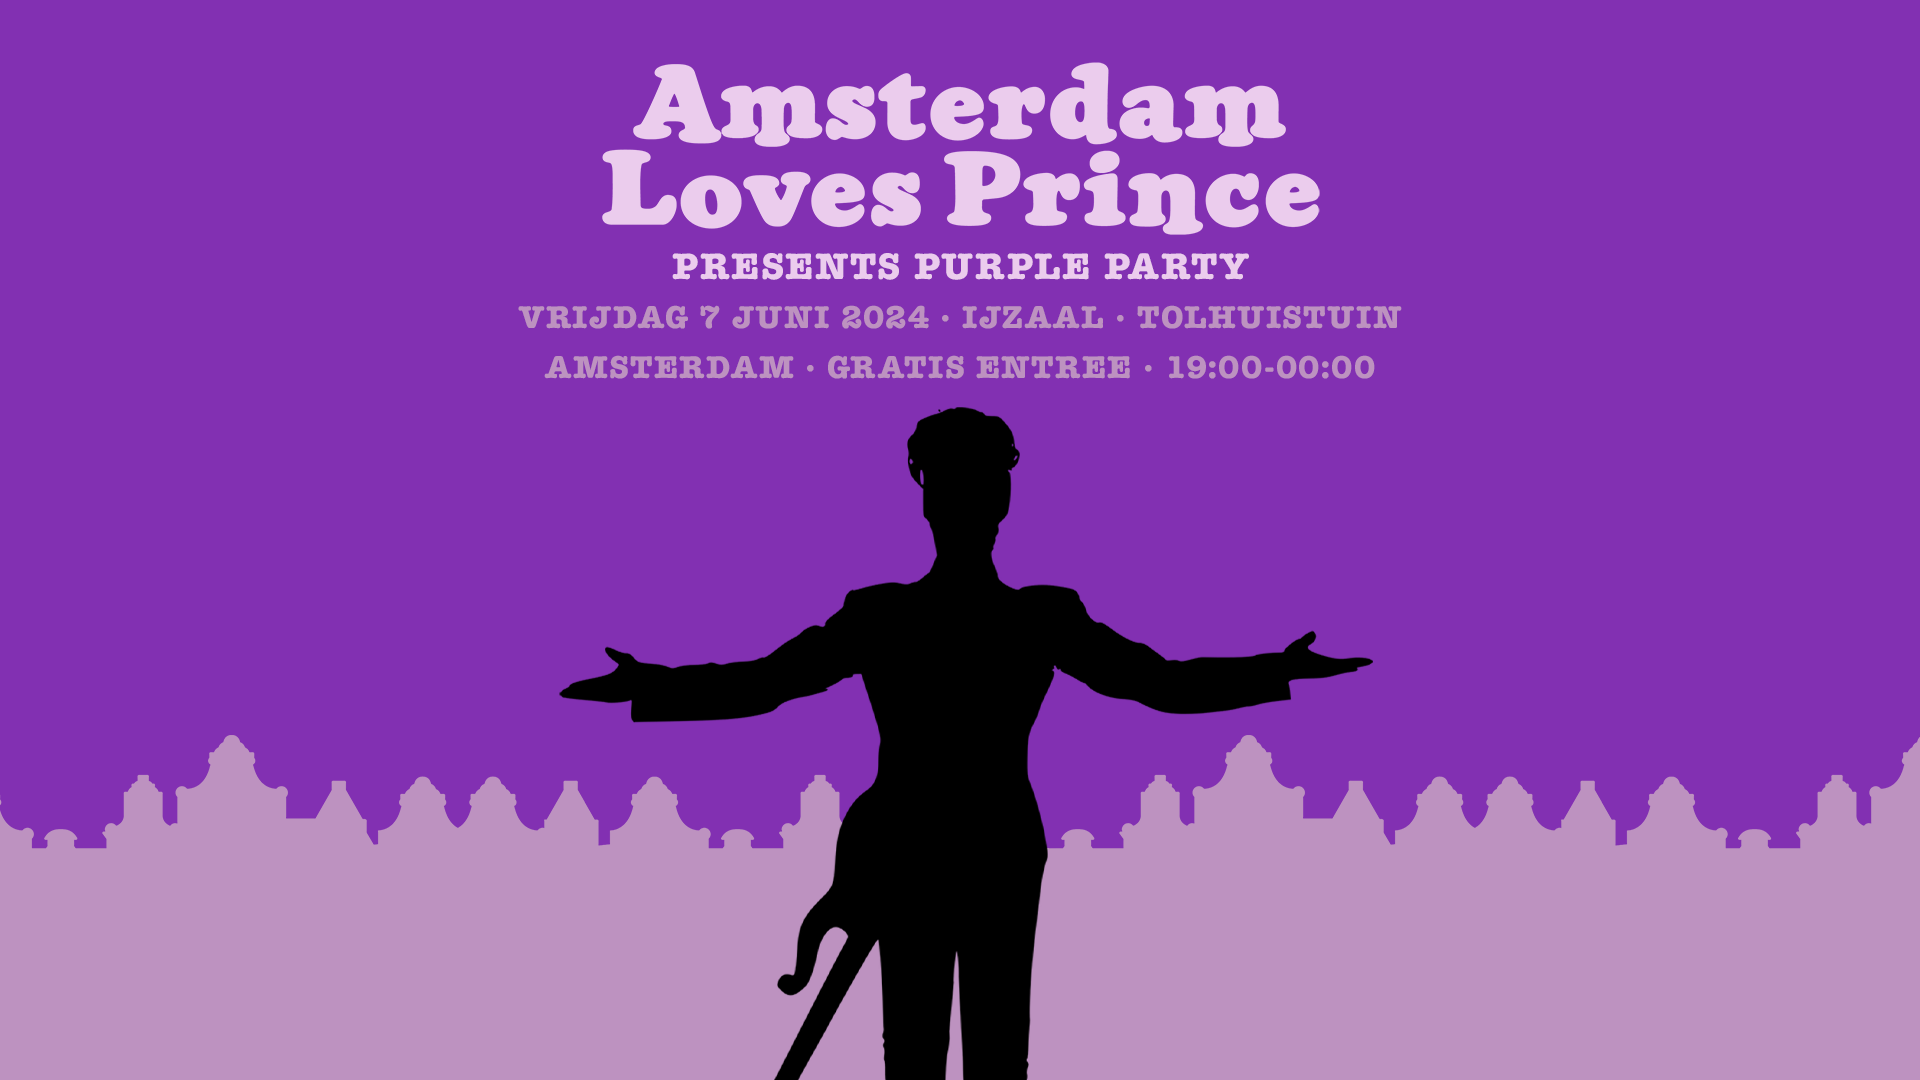 Amsterdam Loves Prince presents 'Purple Party'